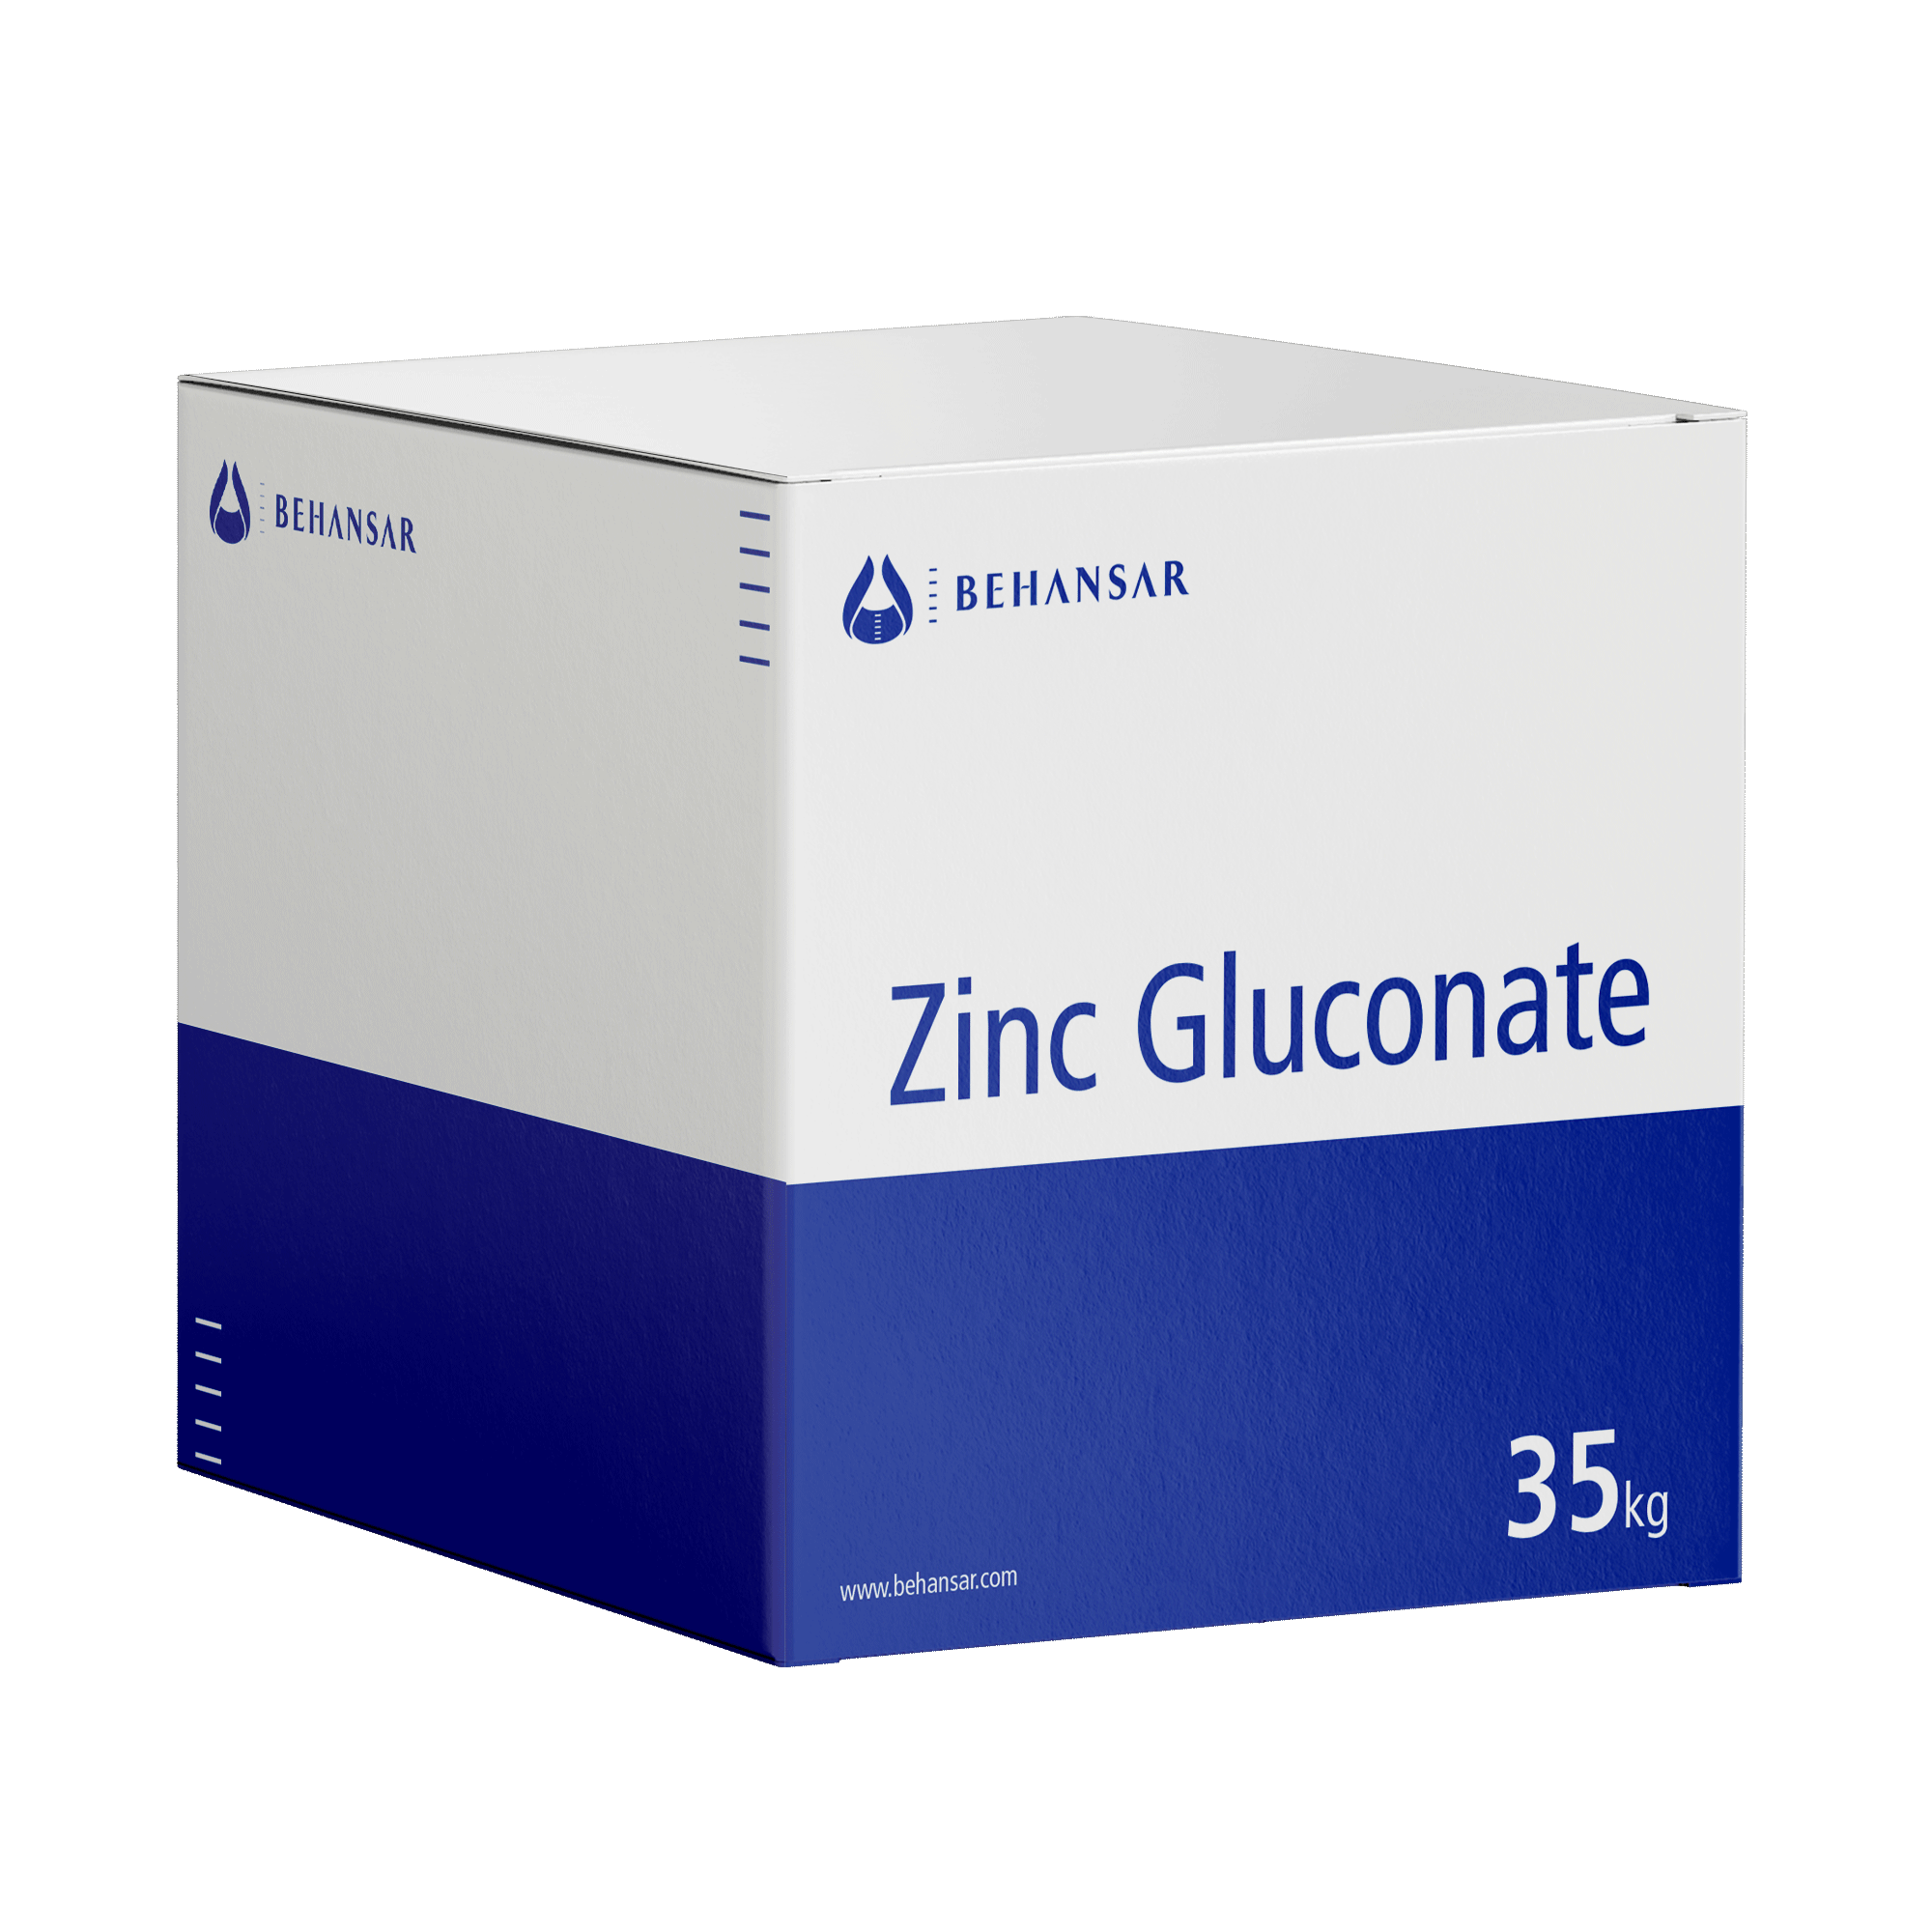 Zinc Gluconate is one of the products of Behansar Co